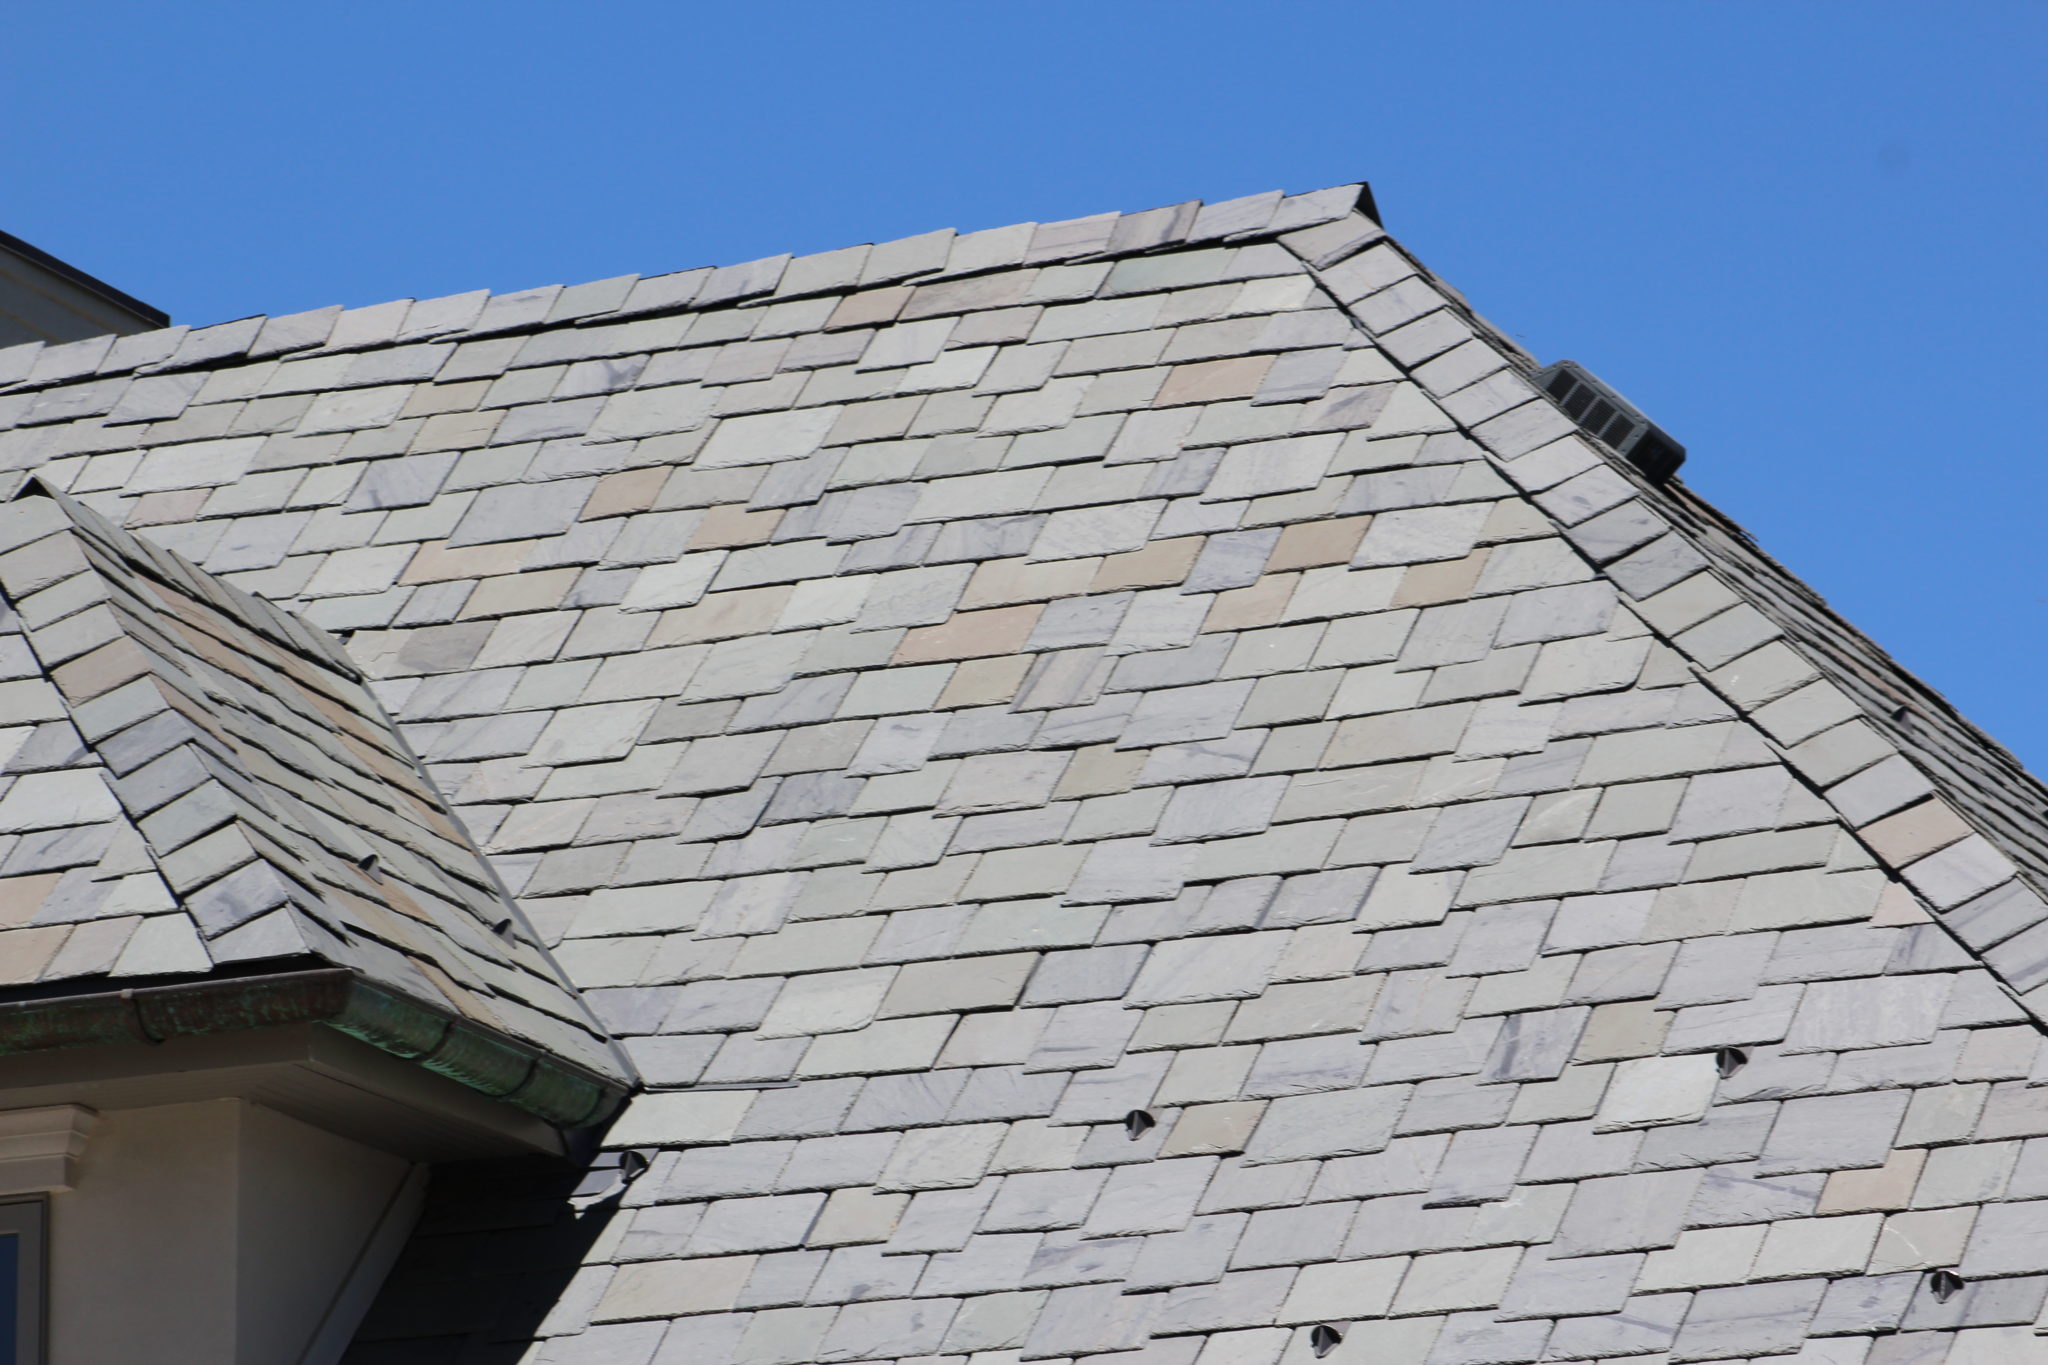 Slate Tile Roof Example close up!